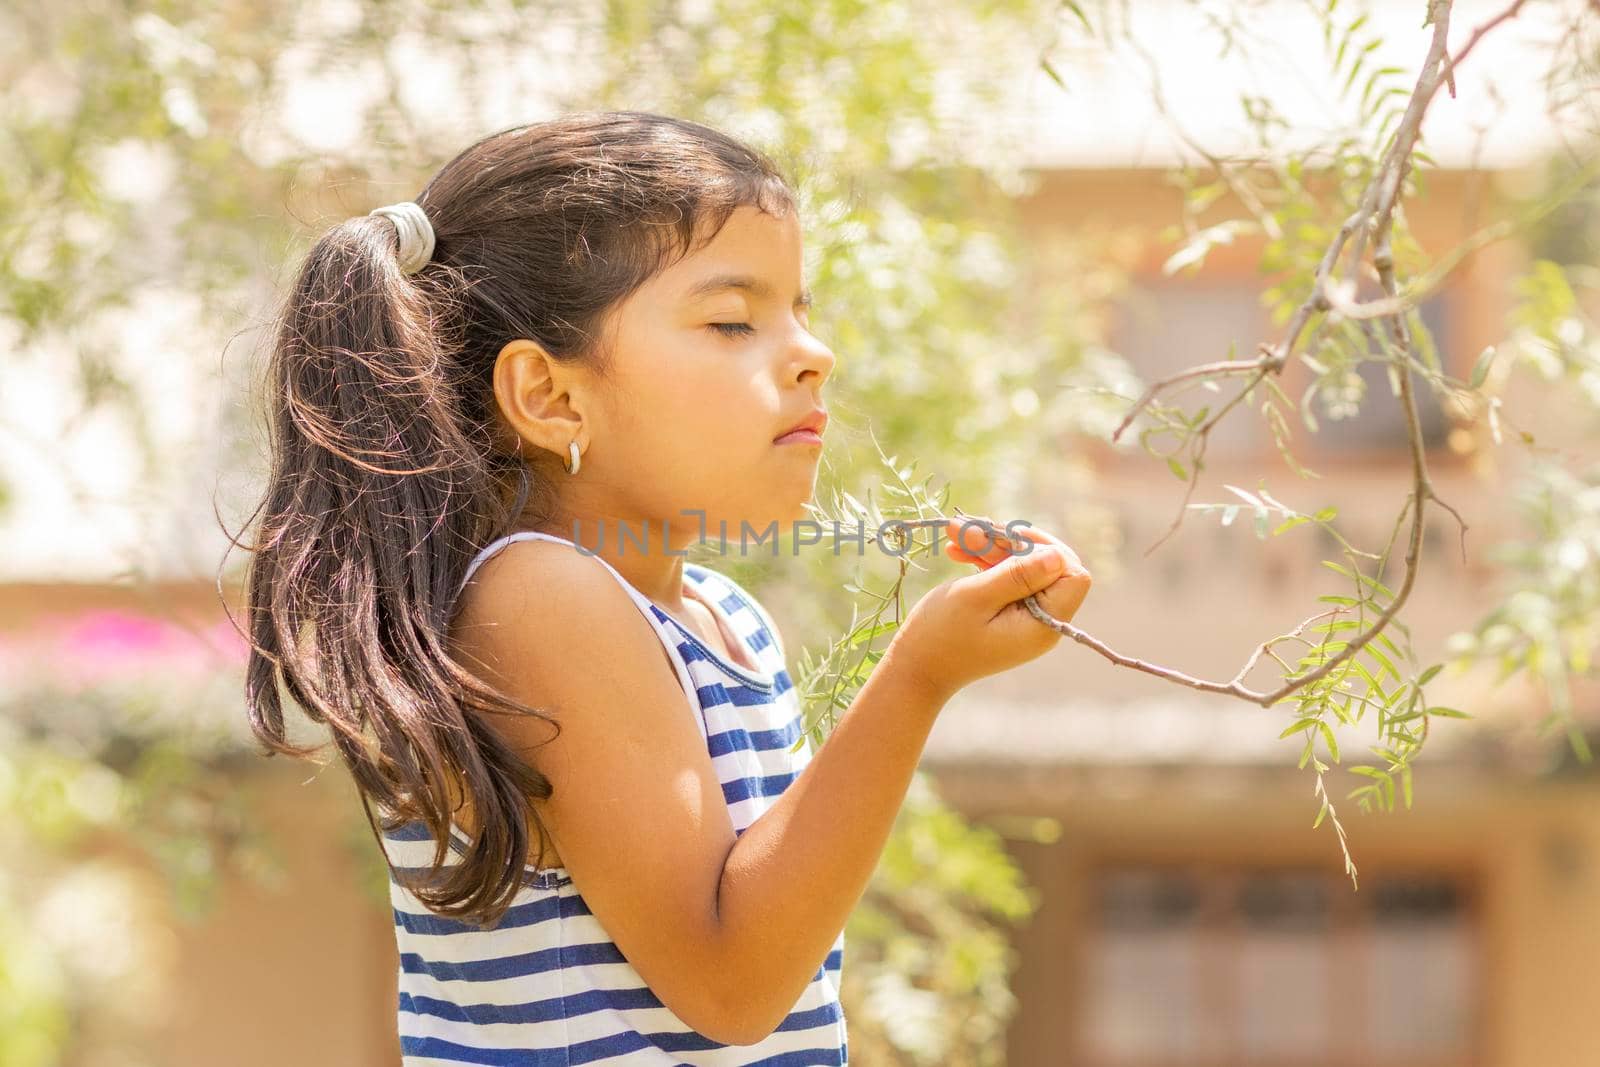 Little girl enjoying the smell of plants in nature by eagg13